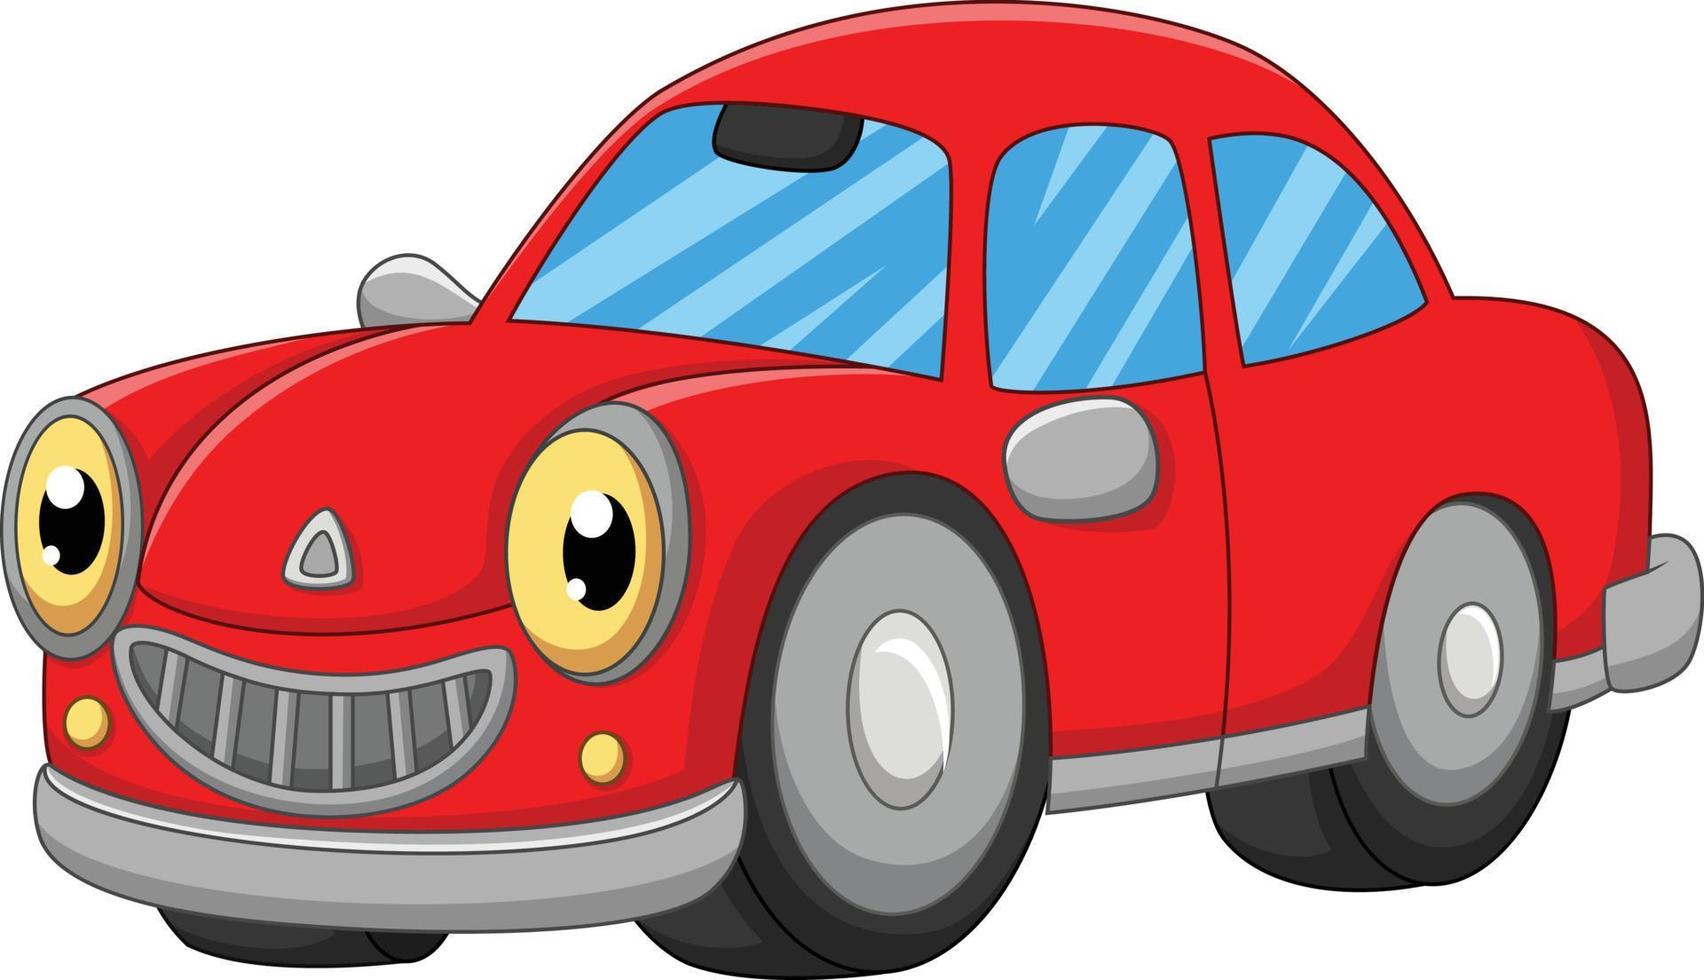 Smiling red car cartoon on white background vector